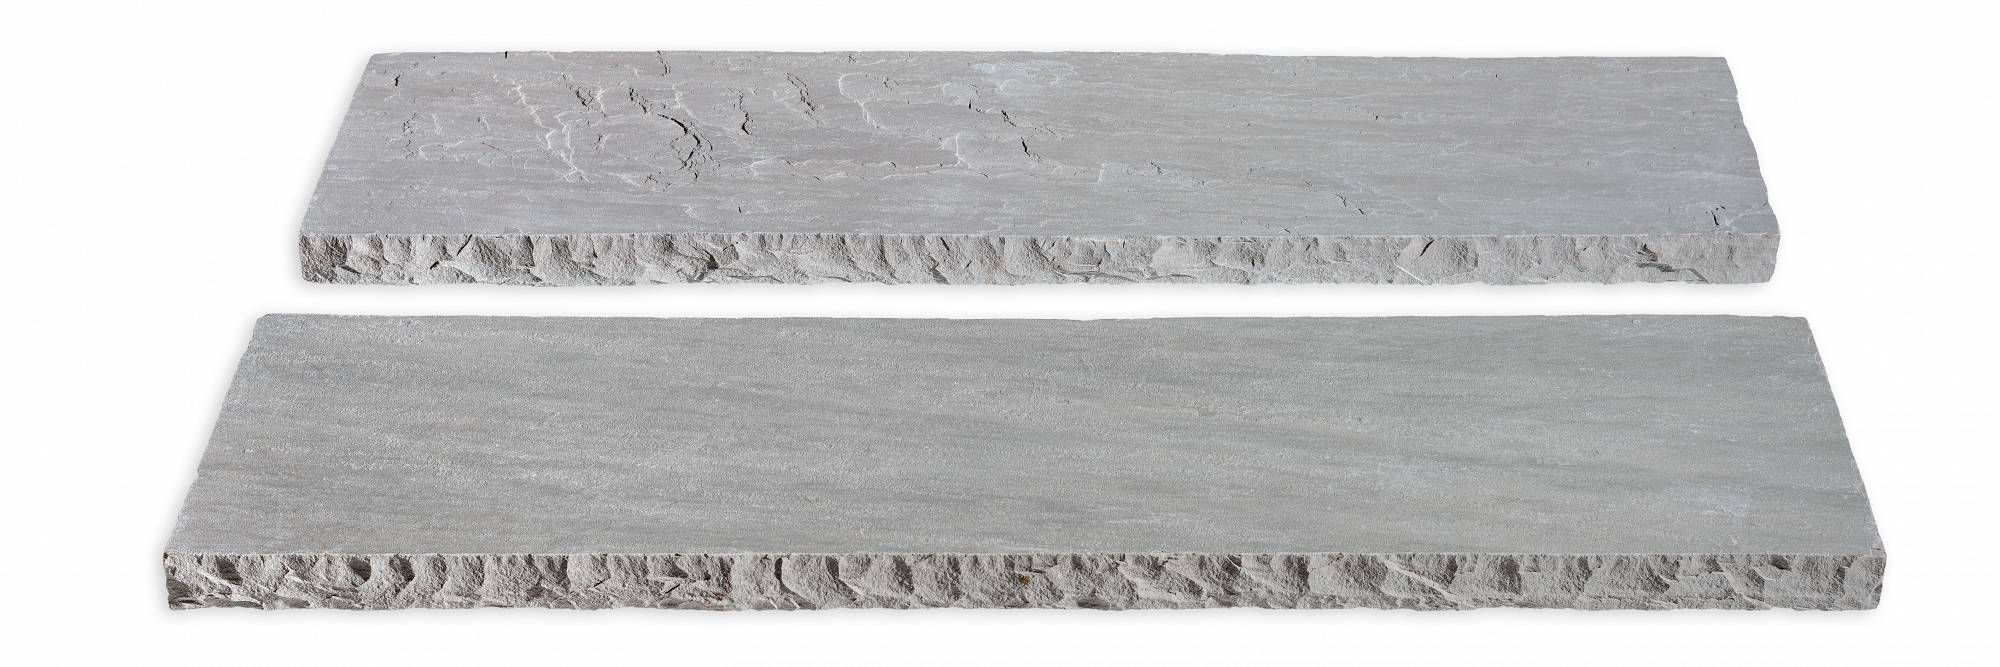 appalachian grey old world flagstone artisan paver tread molding 12 by 48 by 2 inch exterior applications manufactured by f and m supply distributed by surface group